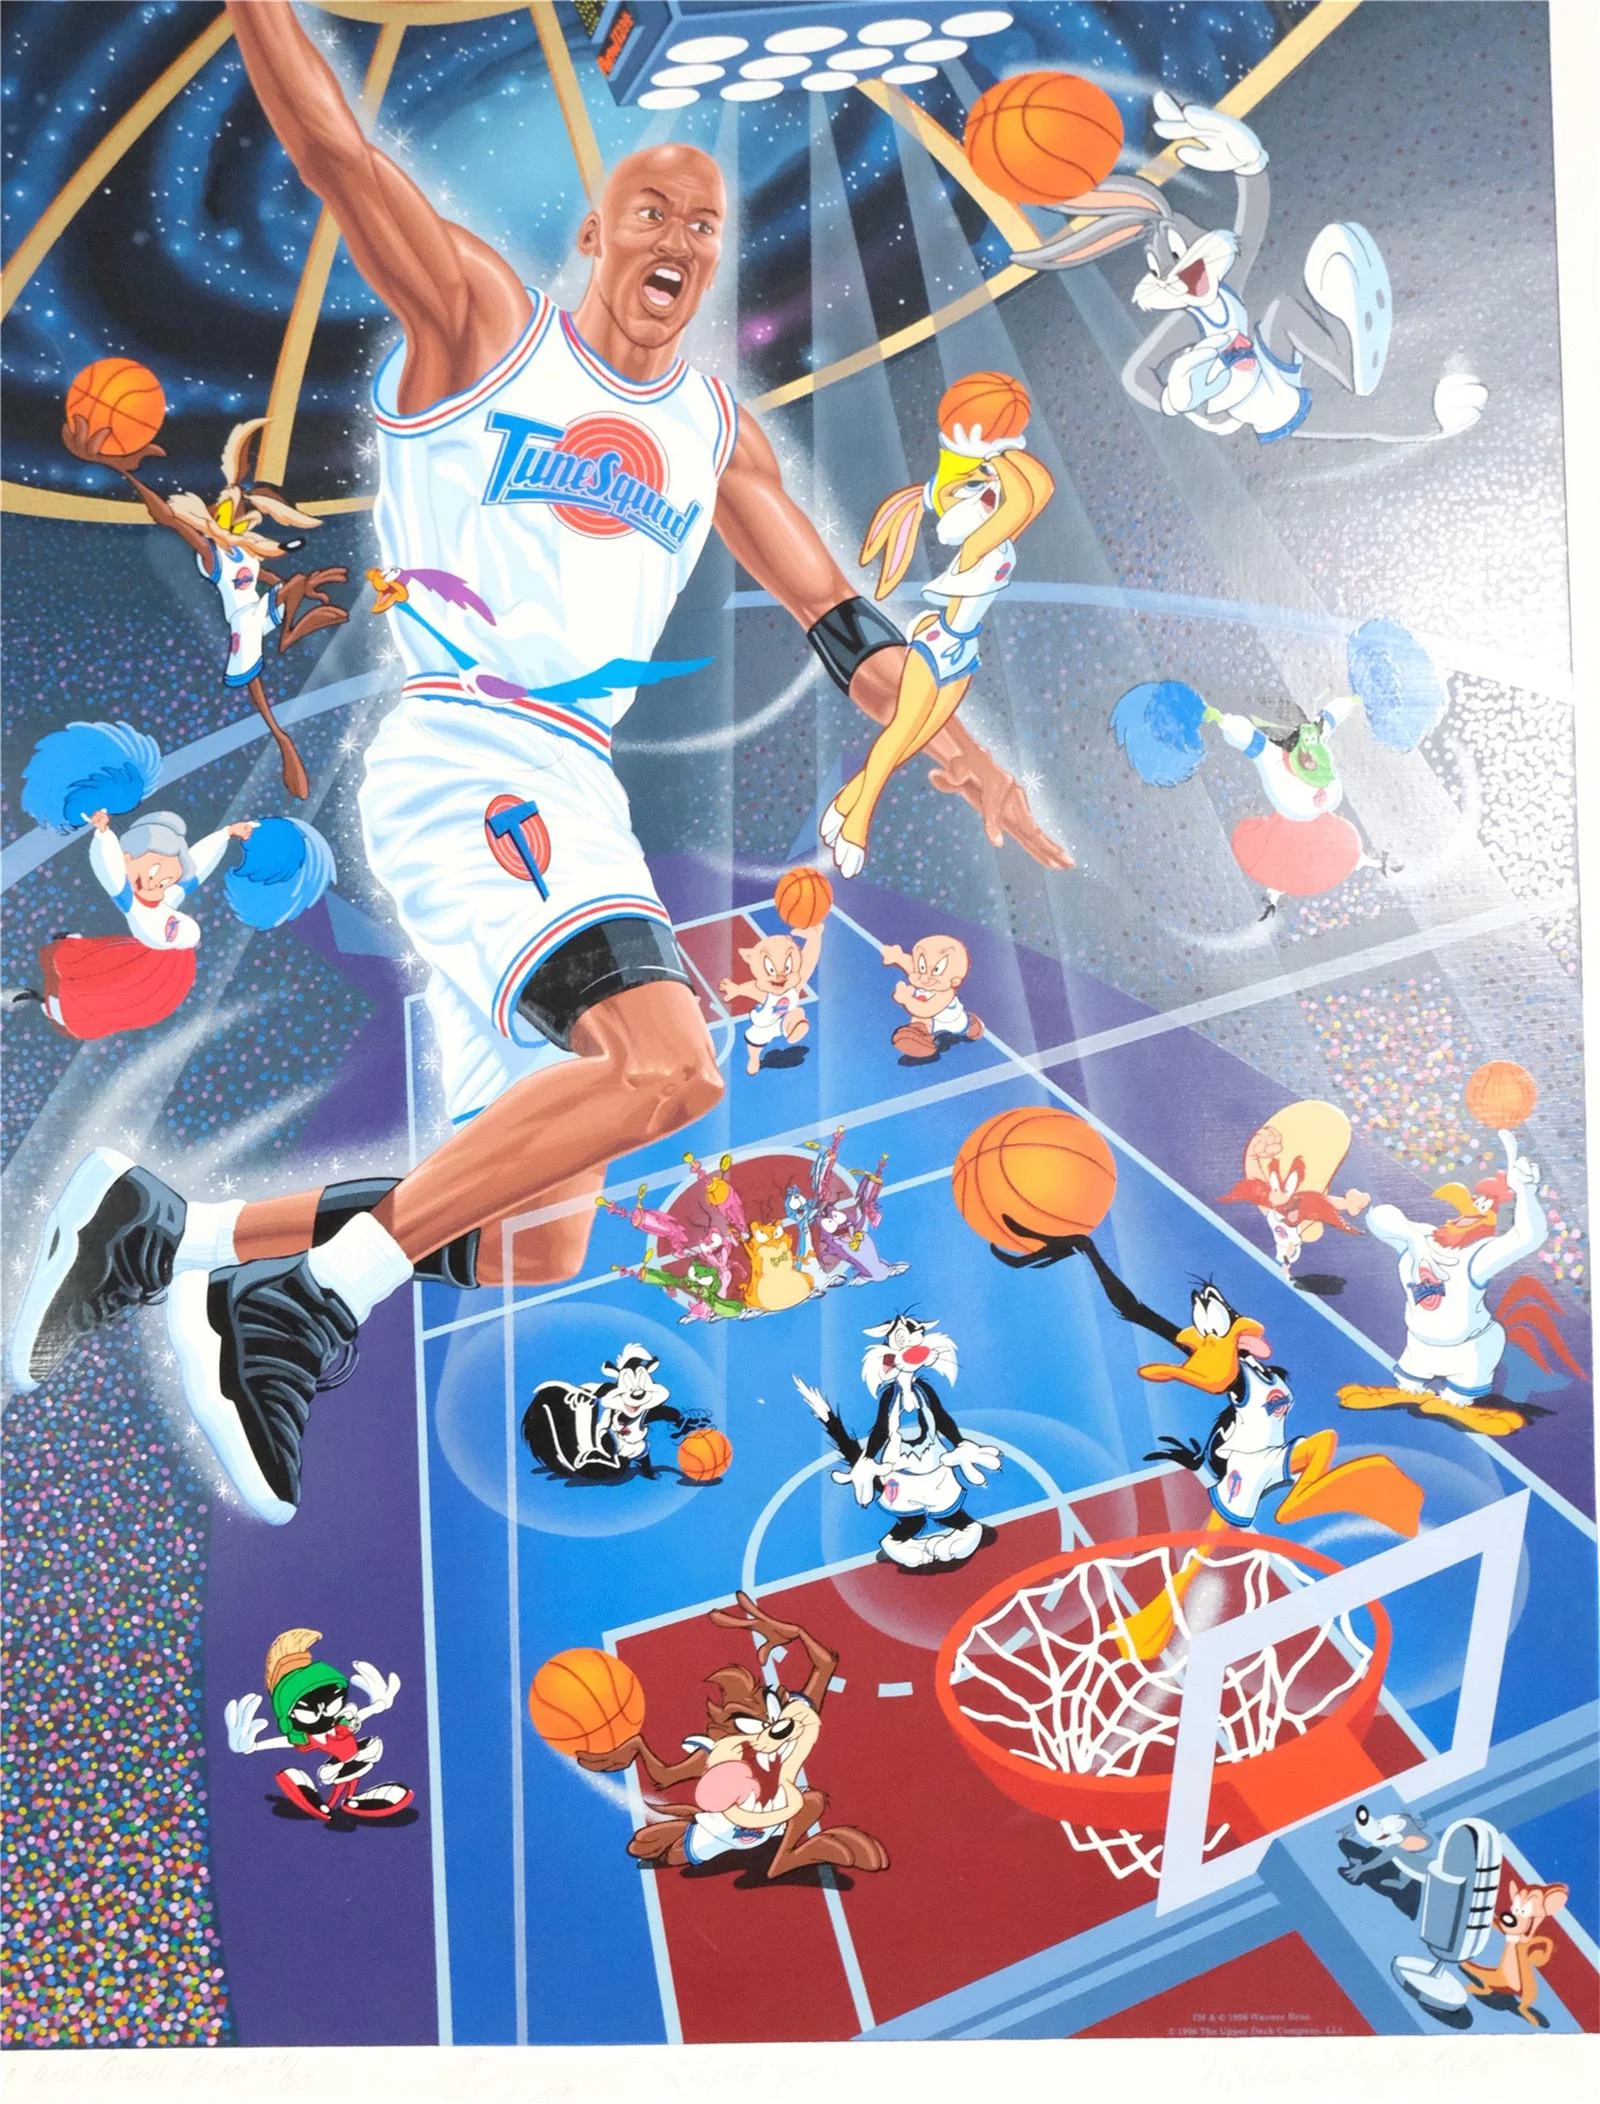 MELANIE TAYLOR KENT SPACE JAM 1996－【Deal Price Picture】